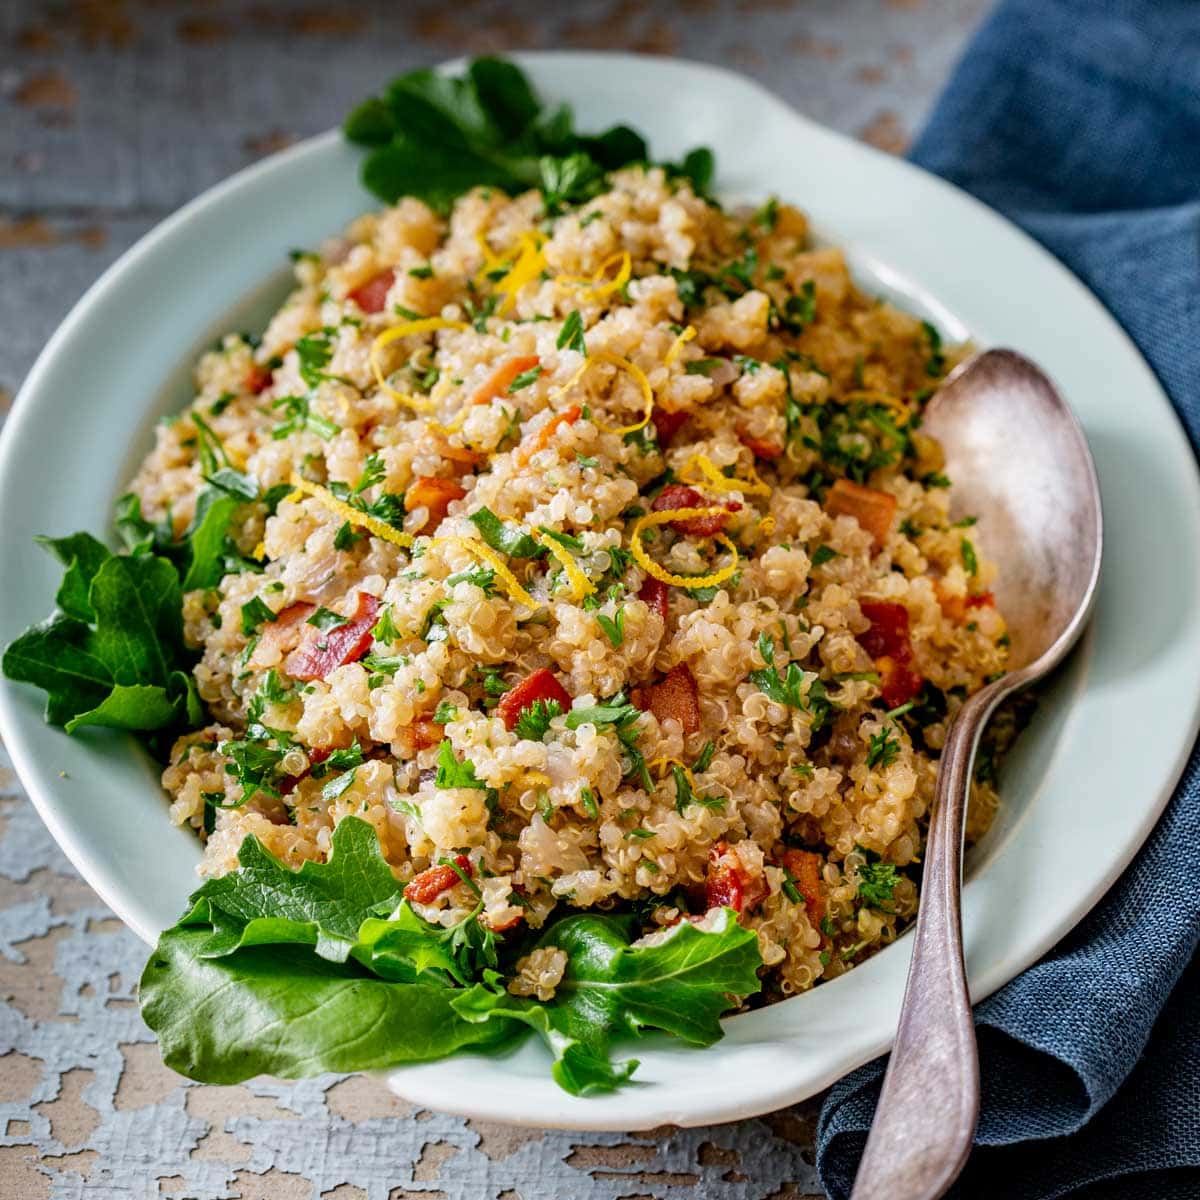 The fibre in quinoa can help with cholesterol and blood sugar levels. Photo/Net